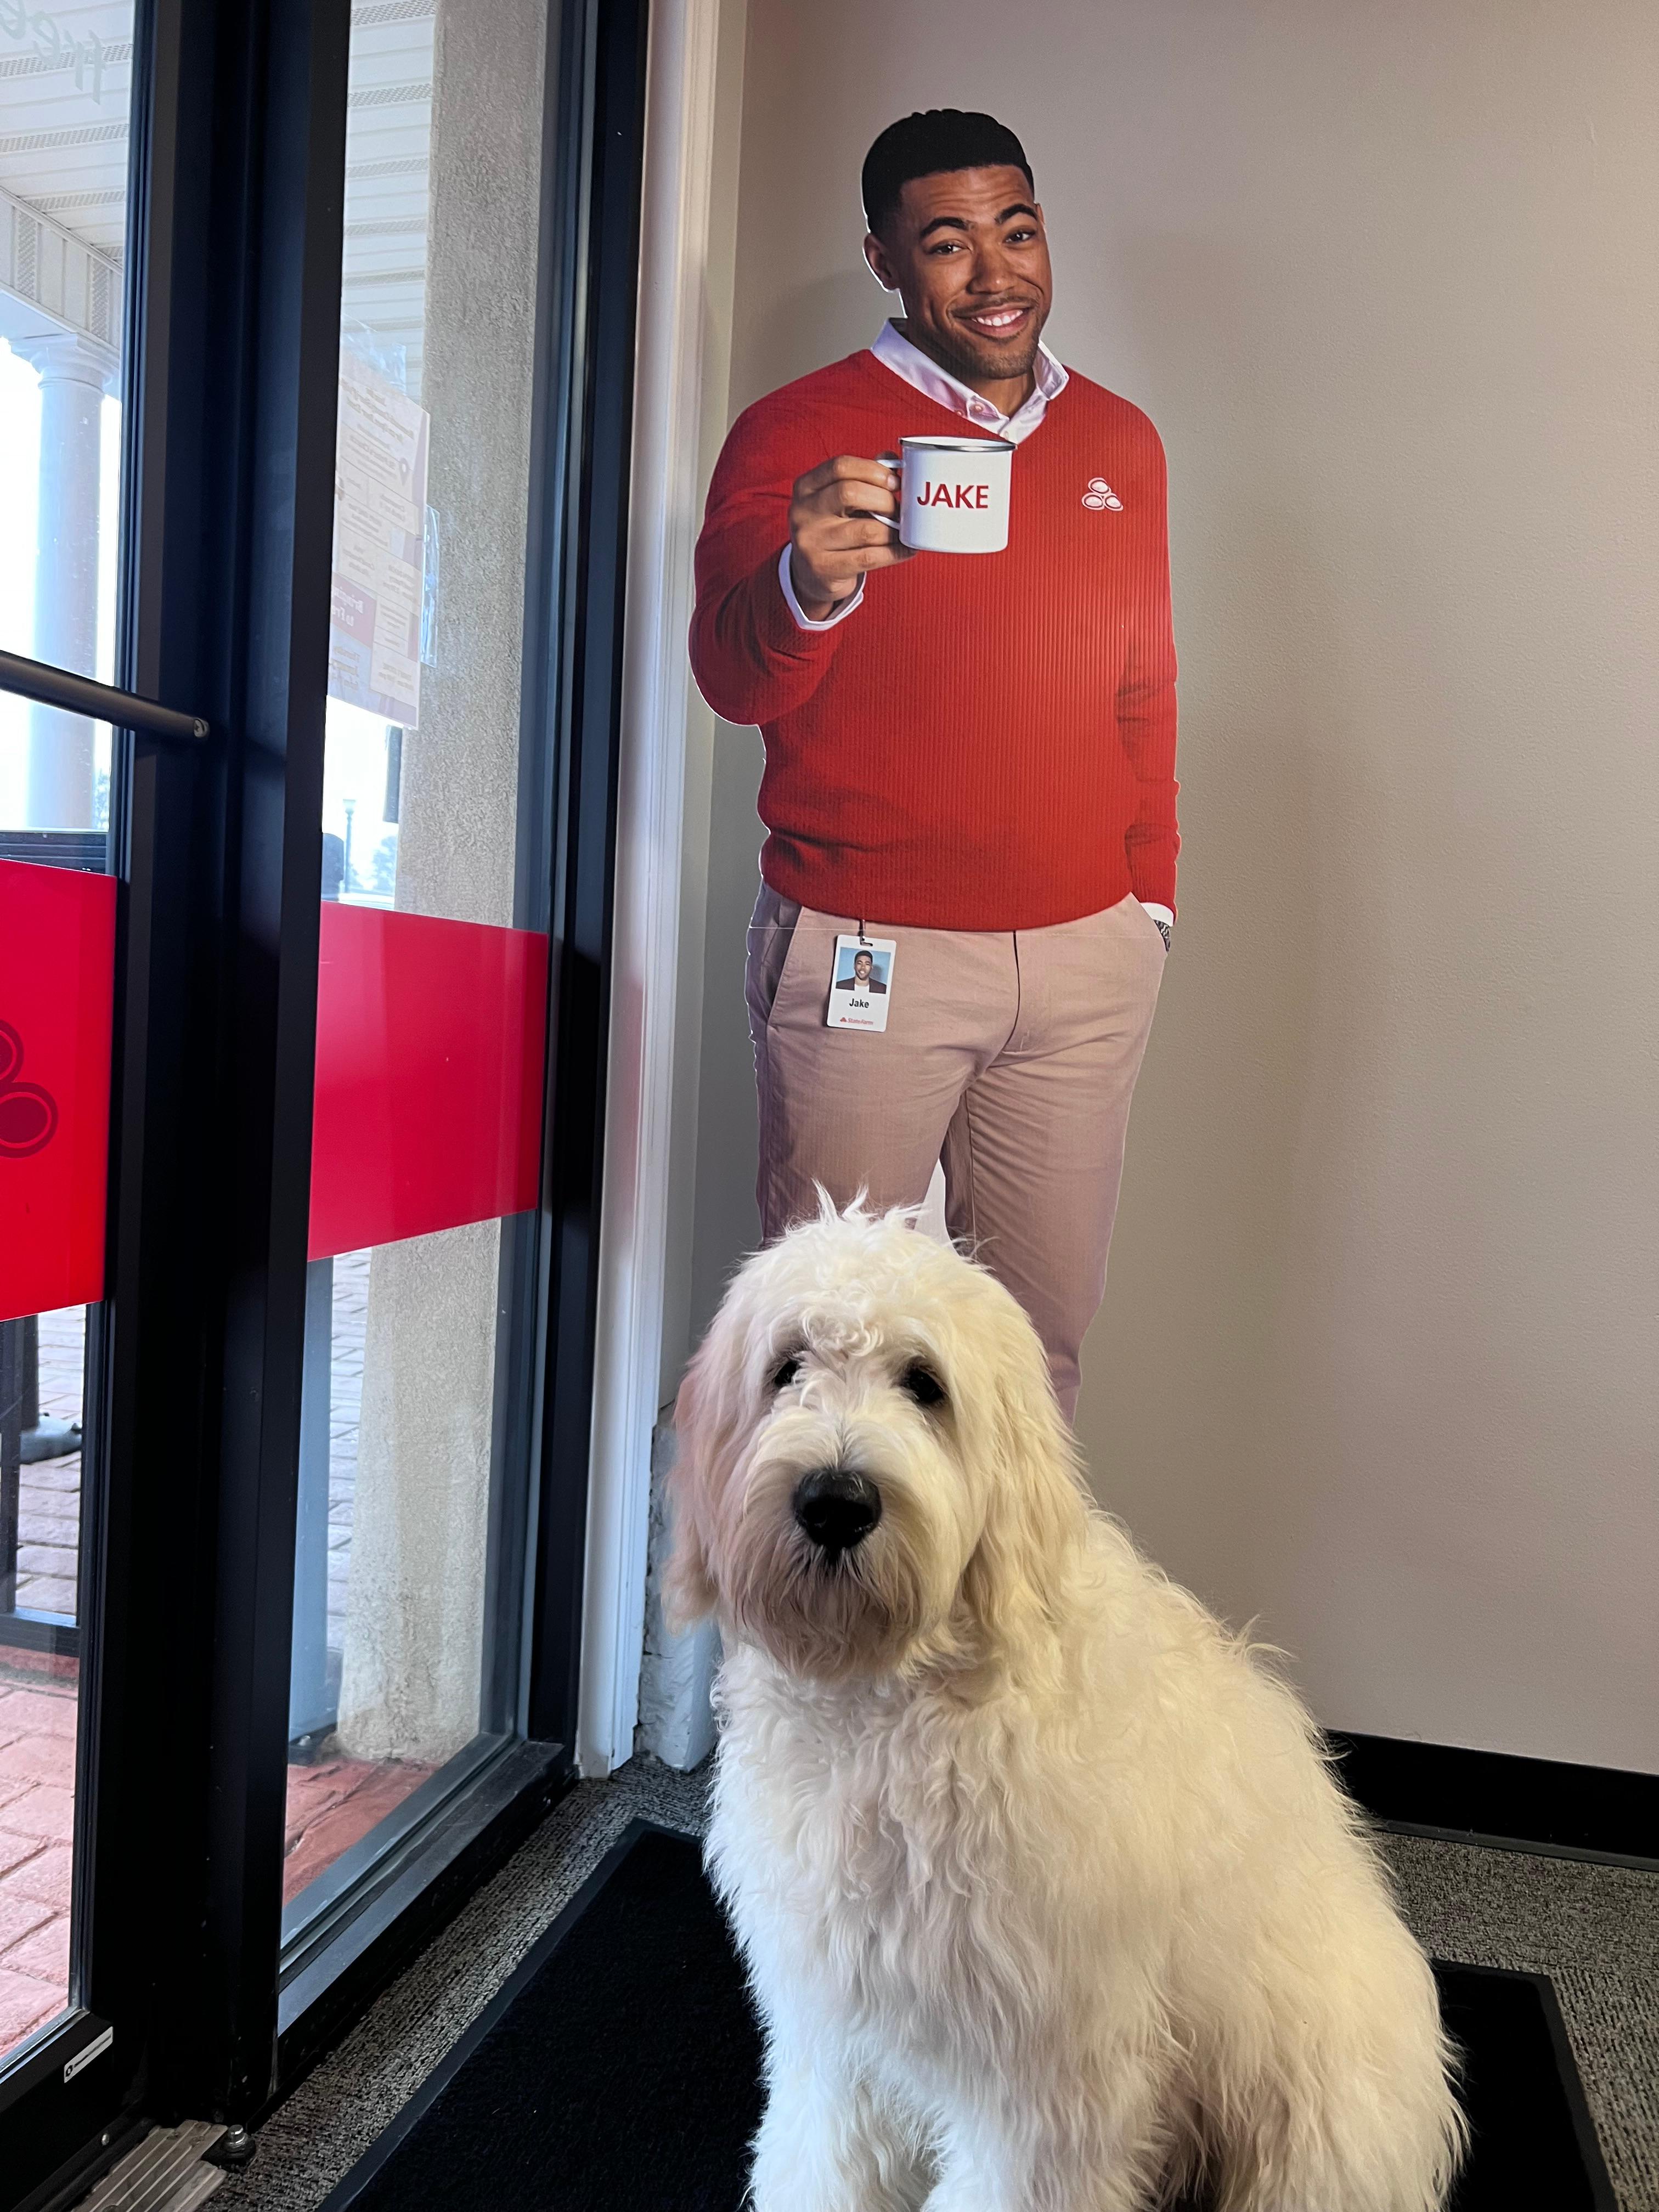 Maverick hanging out with Jake from State Farm!